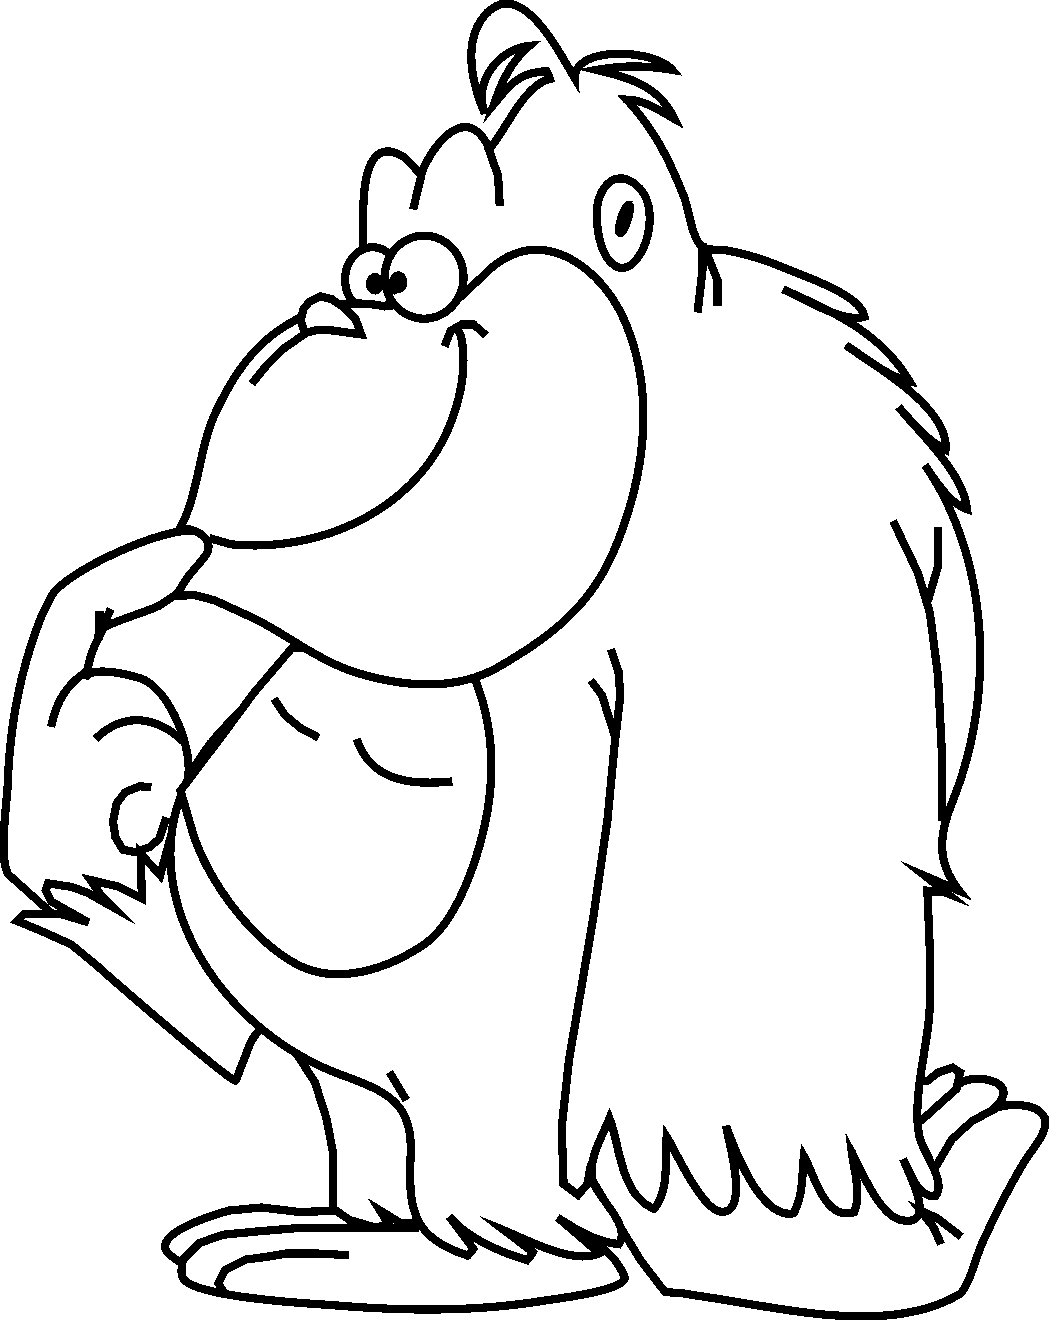 Cartoon animal coloring pages - Coloring Pages & Pictures - IMAGIXS